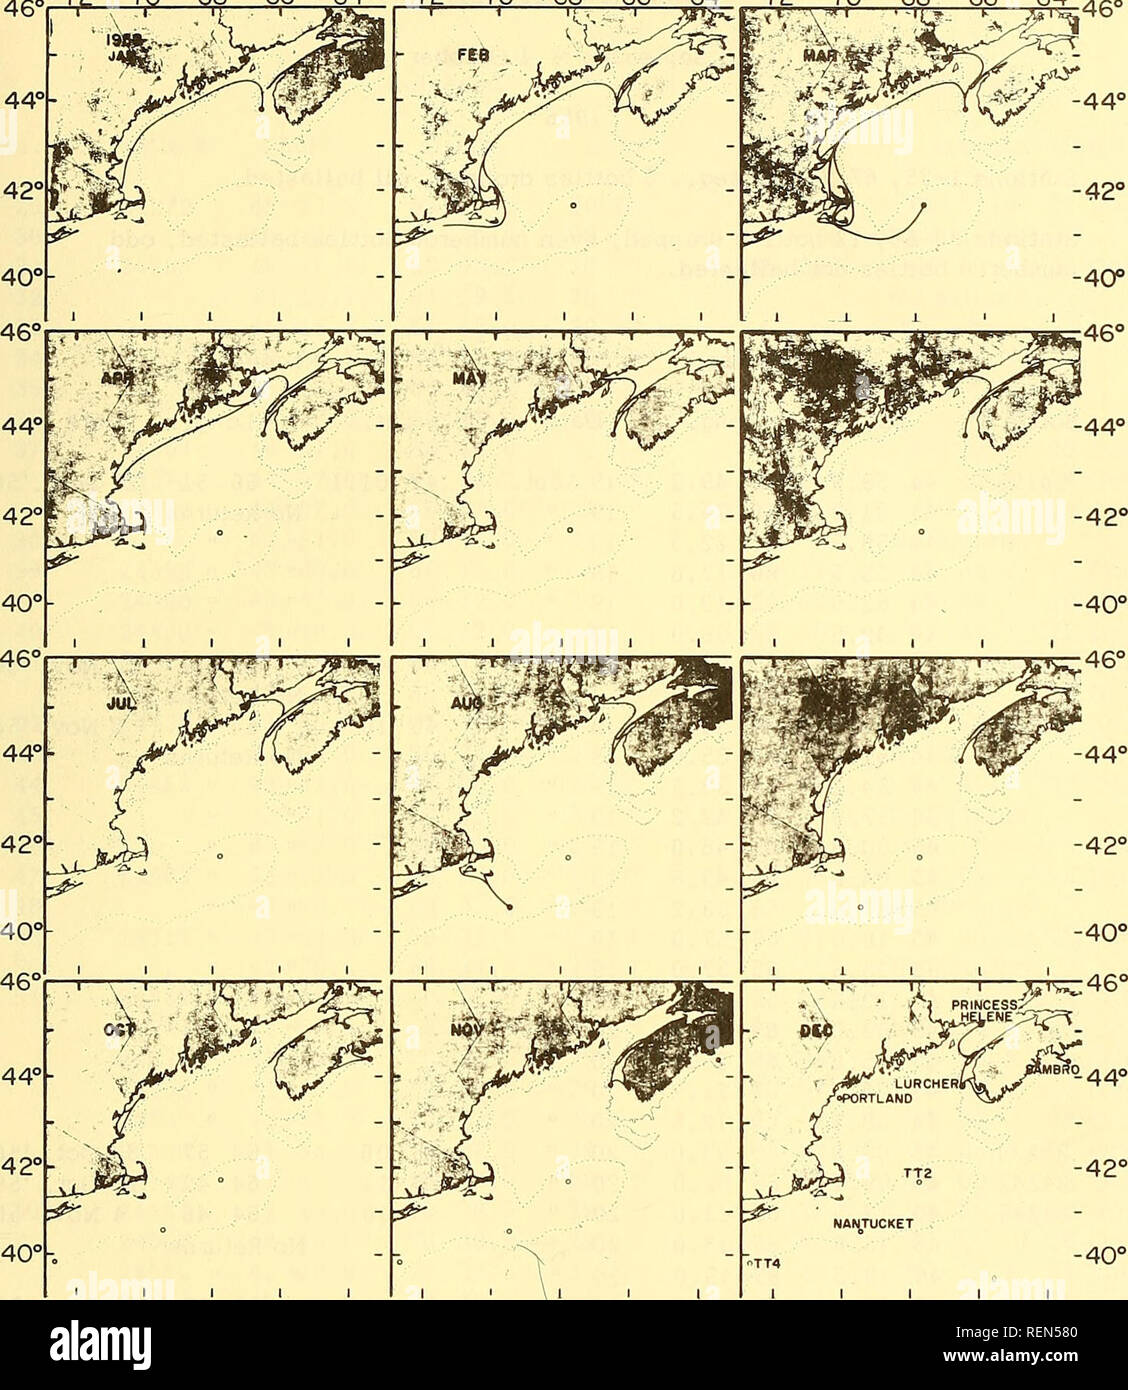 . Drift bottle records for the Gulf of Maine, Georges Bank and Bay of Fundy, 1956-58. Drift bottles; Ocean currents; Ocean currents; Ocean currents. 46' 72° 70° 68° 66° 64° 72° 70° 68° 66° 64° 72° 70° 68° 66° 64° 'r &gt;—-r TT—:—r-—sc»ci r 1 ^nr: 1 jgiso^ v'.ir- «&gt; i rr? f t^tsz'. 72° 70° 68° 66° 64° 72° 70° 68° 66° 64° 72° 70° 68° 66° 64° FIGURE 24.--Surface circulation deduced from recoveries of drift bottles launched from several positions each day during 1958. MS #1051 27. Please note that these images are extracted from scanned page images that may have been digitally enhanced for re Stock Photo